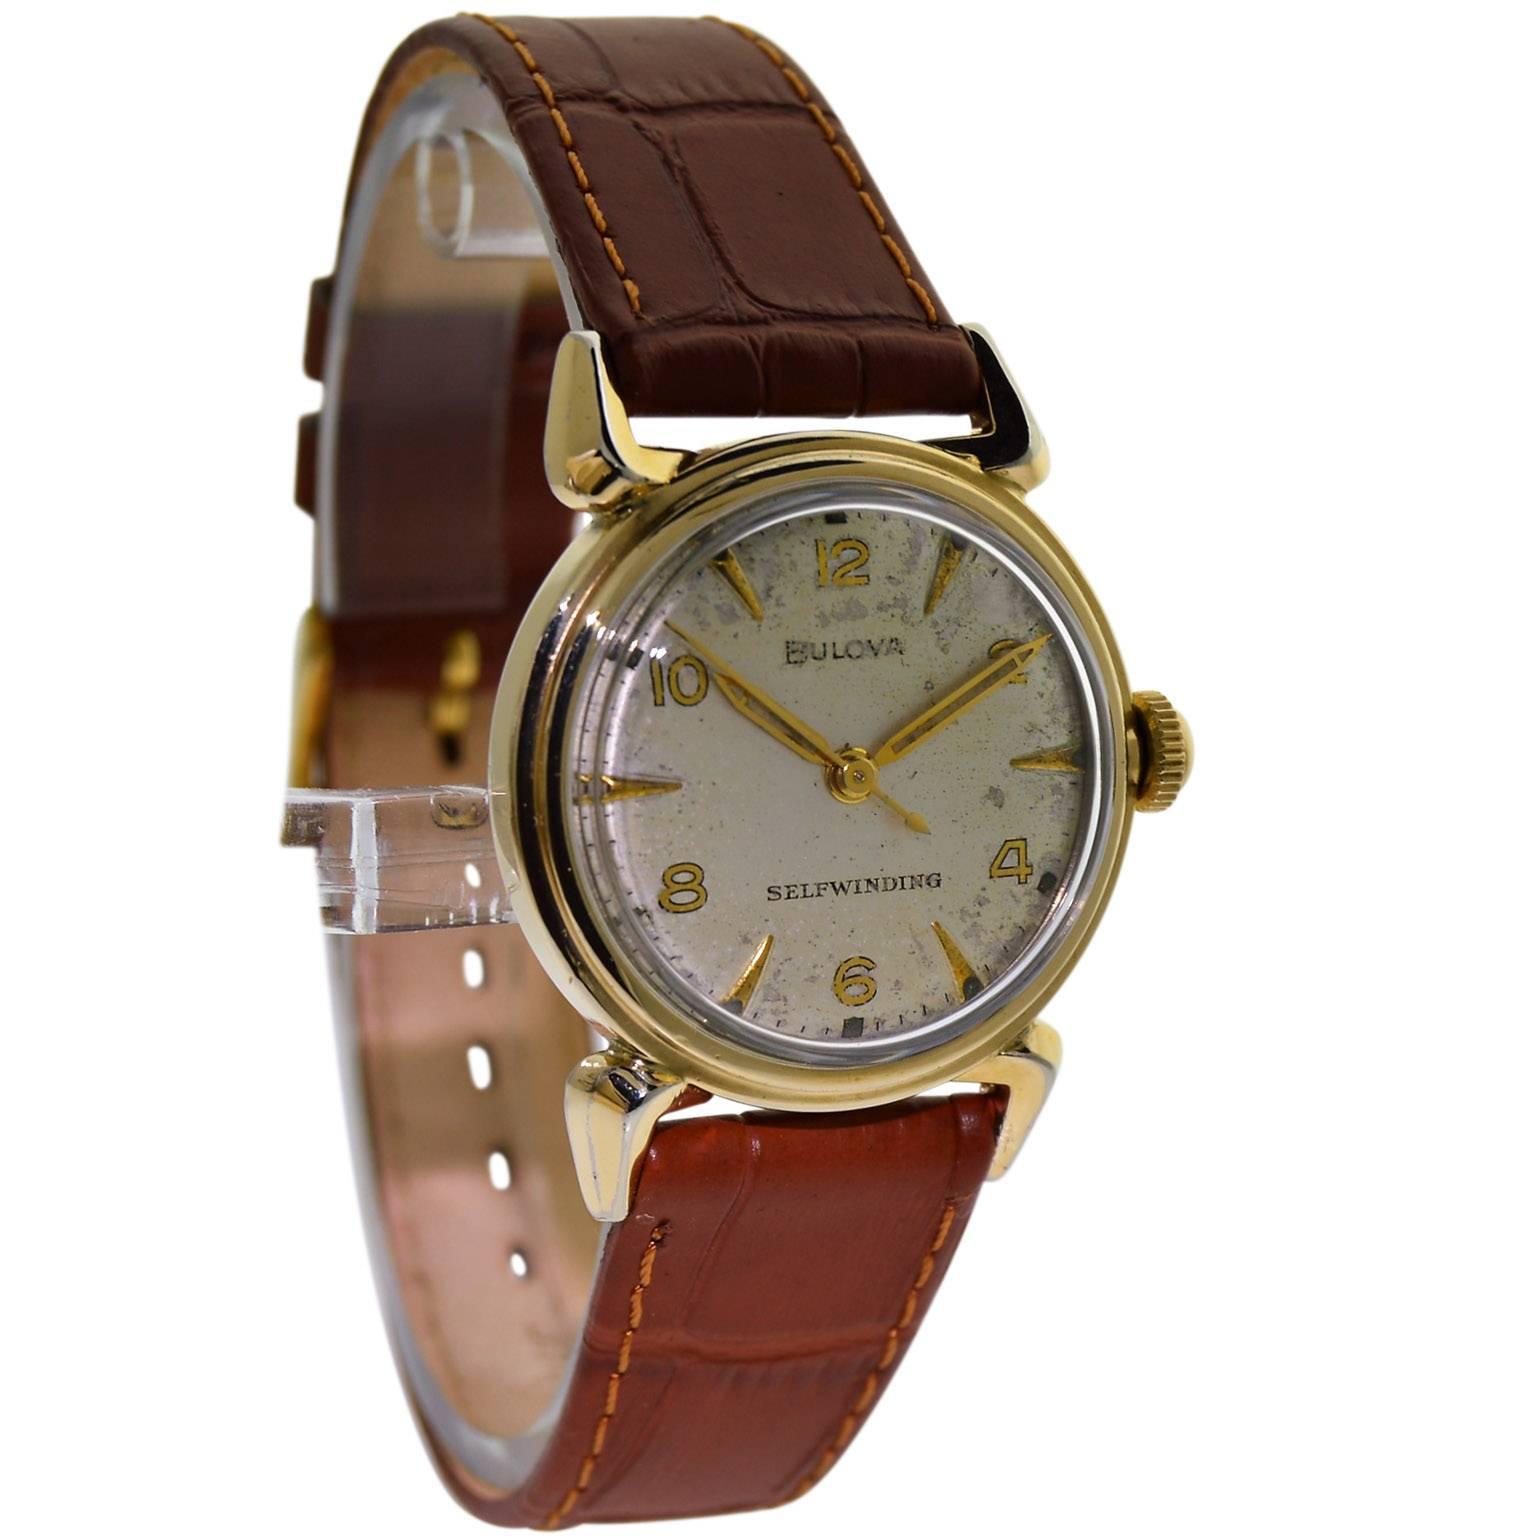 FACTORY / HOUSE: Bulova Watch Company
STYLE / REFERENCE: Round / Art Deco
METAL / MATERIAL: 14Kt. Yellow Gold Filled
CIRCA: 1960's
DIMENSIONS: 40mm X 31mm
MOVEMENT / CALIBER: Selfwinding /17 Jewels 
DIAL / HANDS: Original Silvered Quartered /